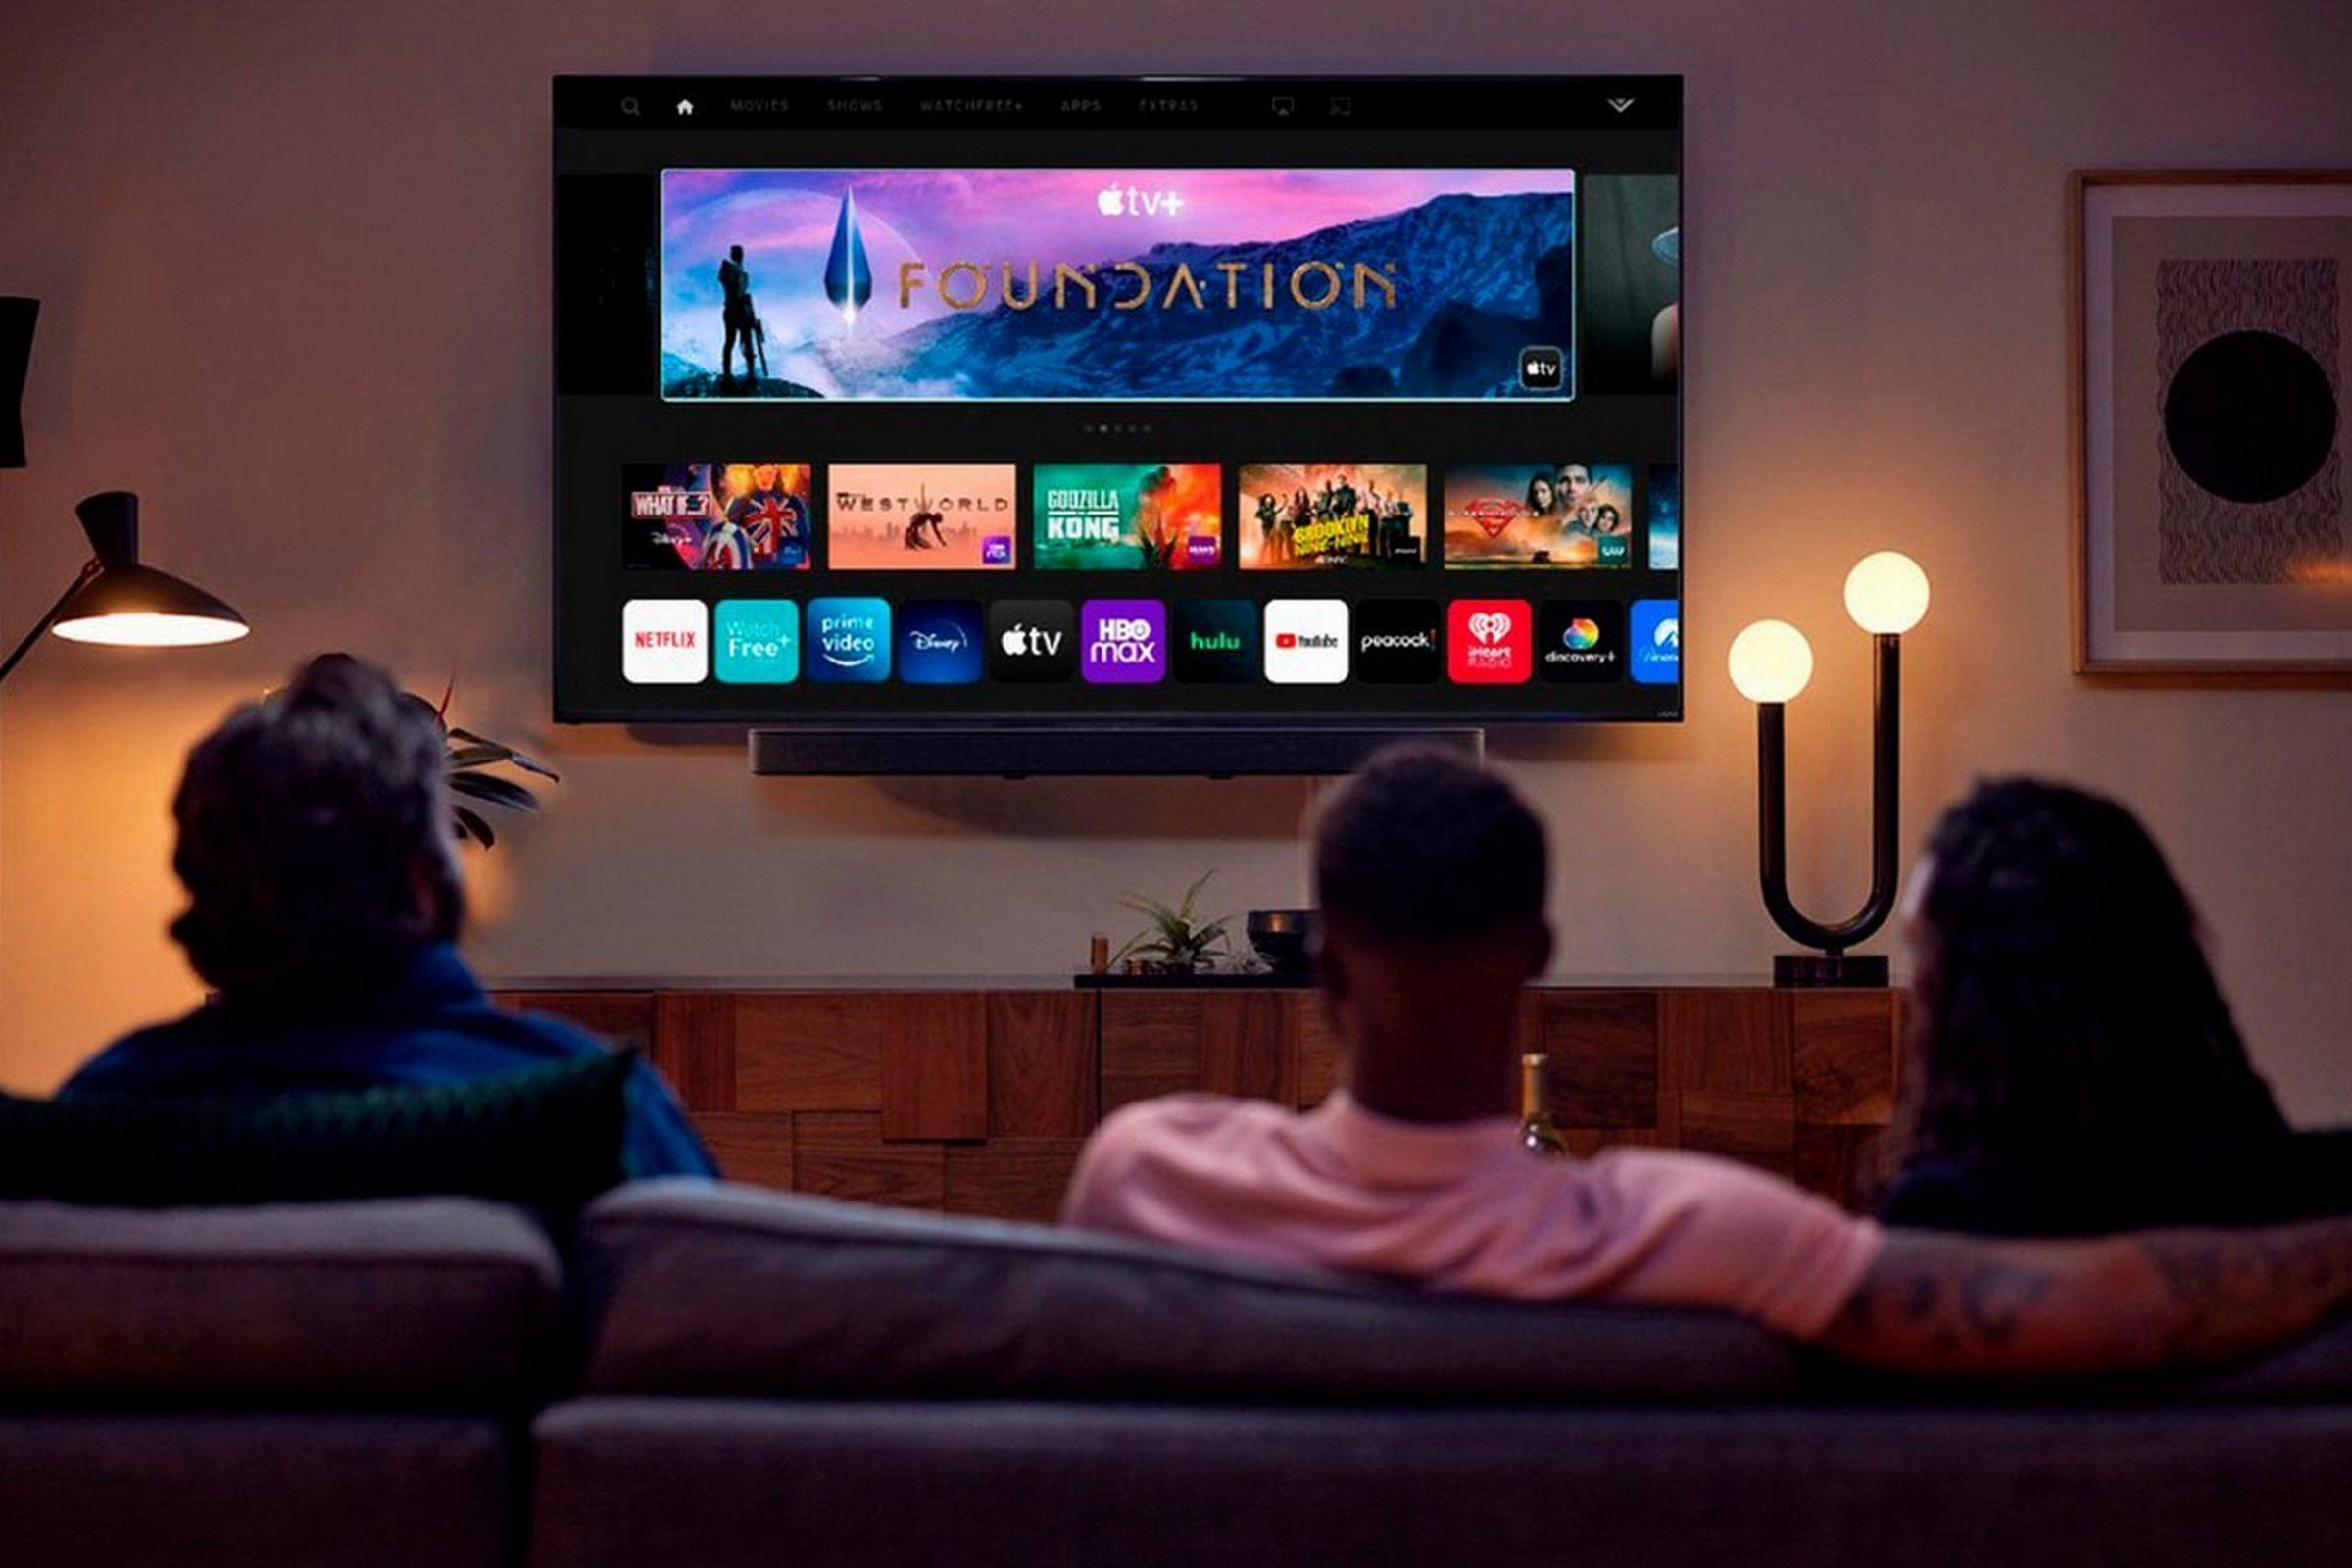 Three people on a couch, pictured from the back, watching a TV mounted on the wall